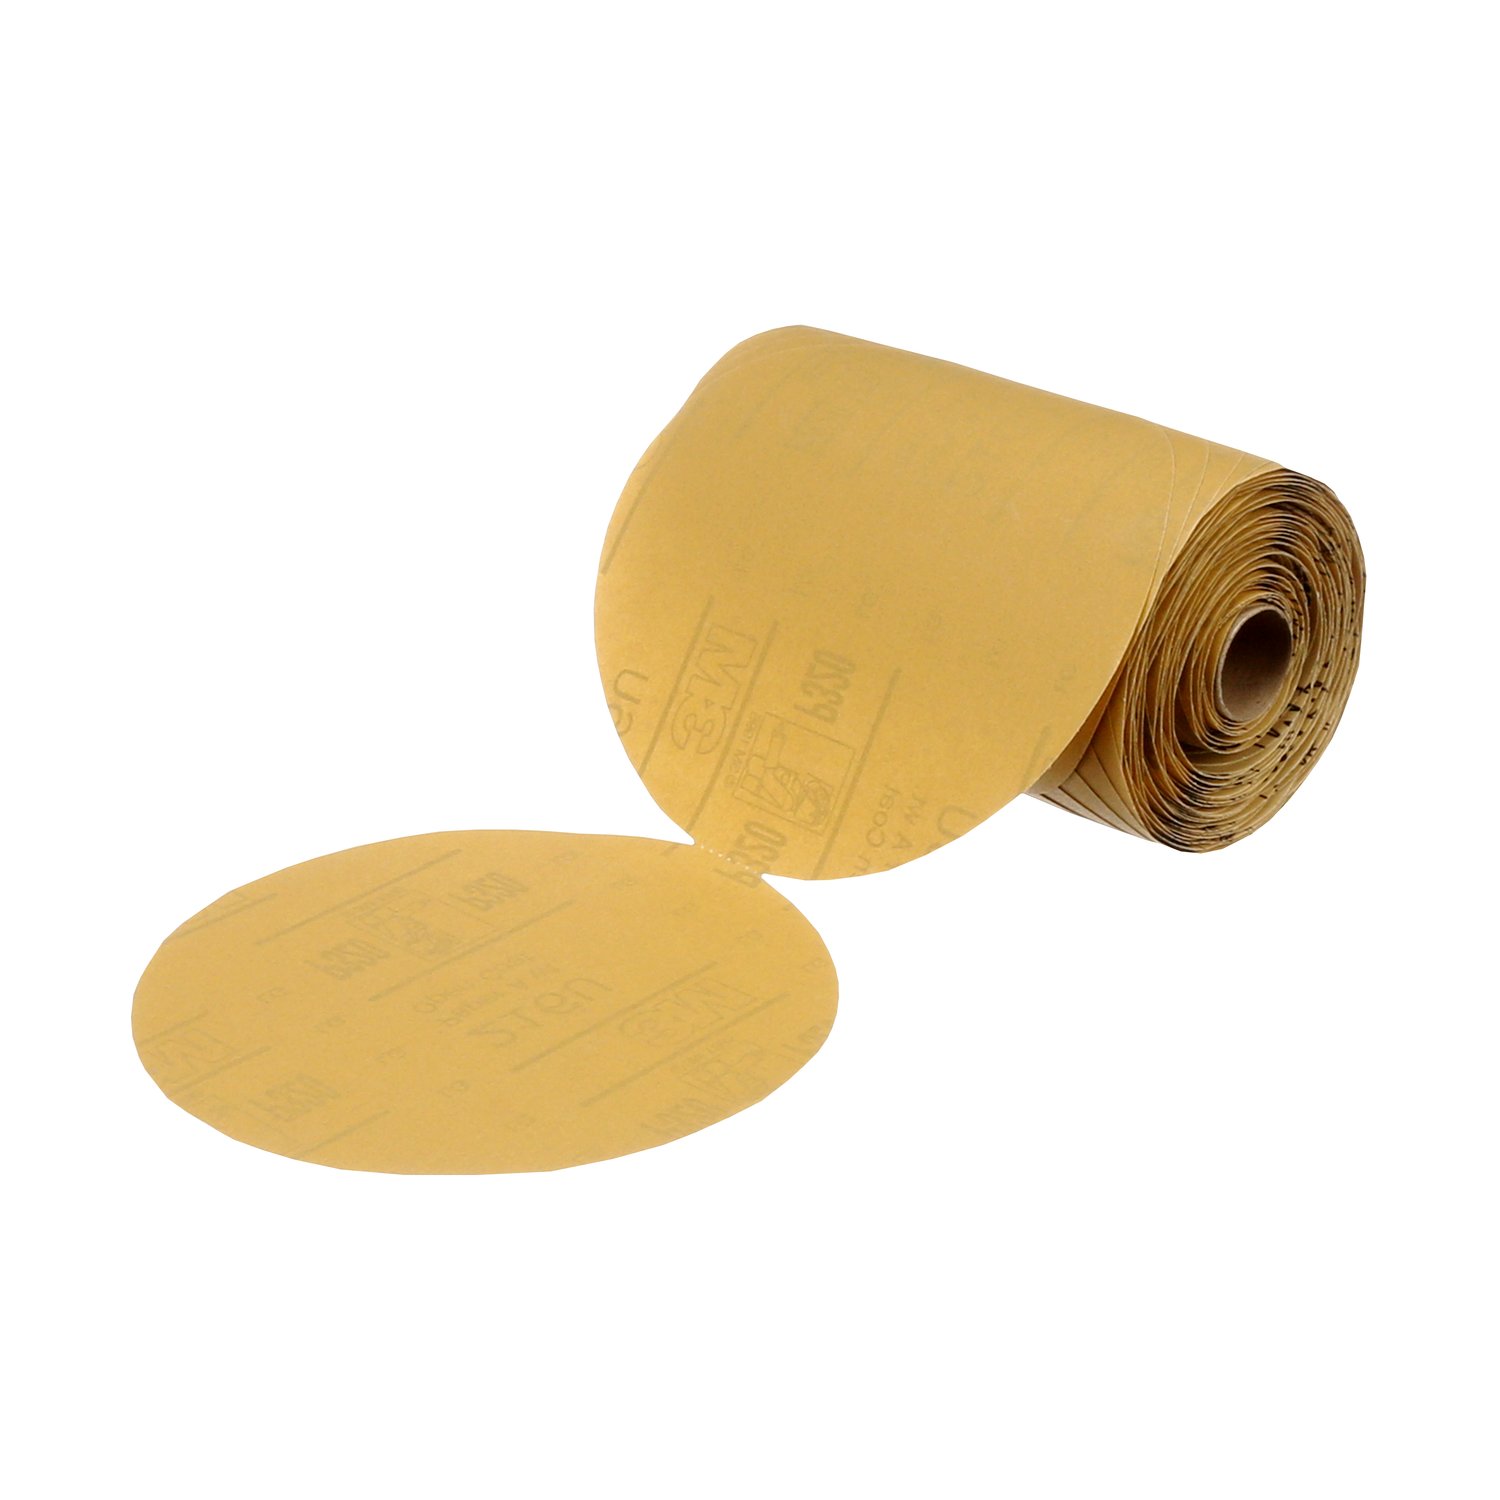 7100106086 - 3M Stikit Gold Paper Disc Roll 216U, P150 A-weight, Config